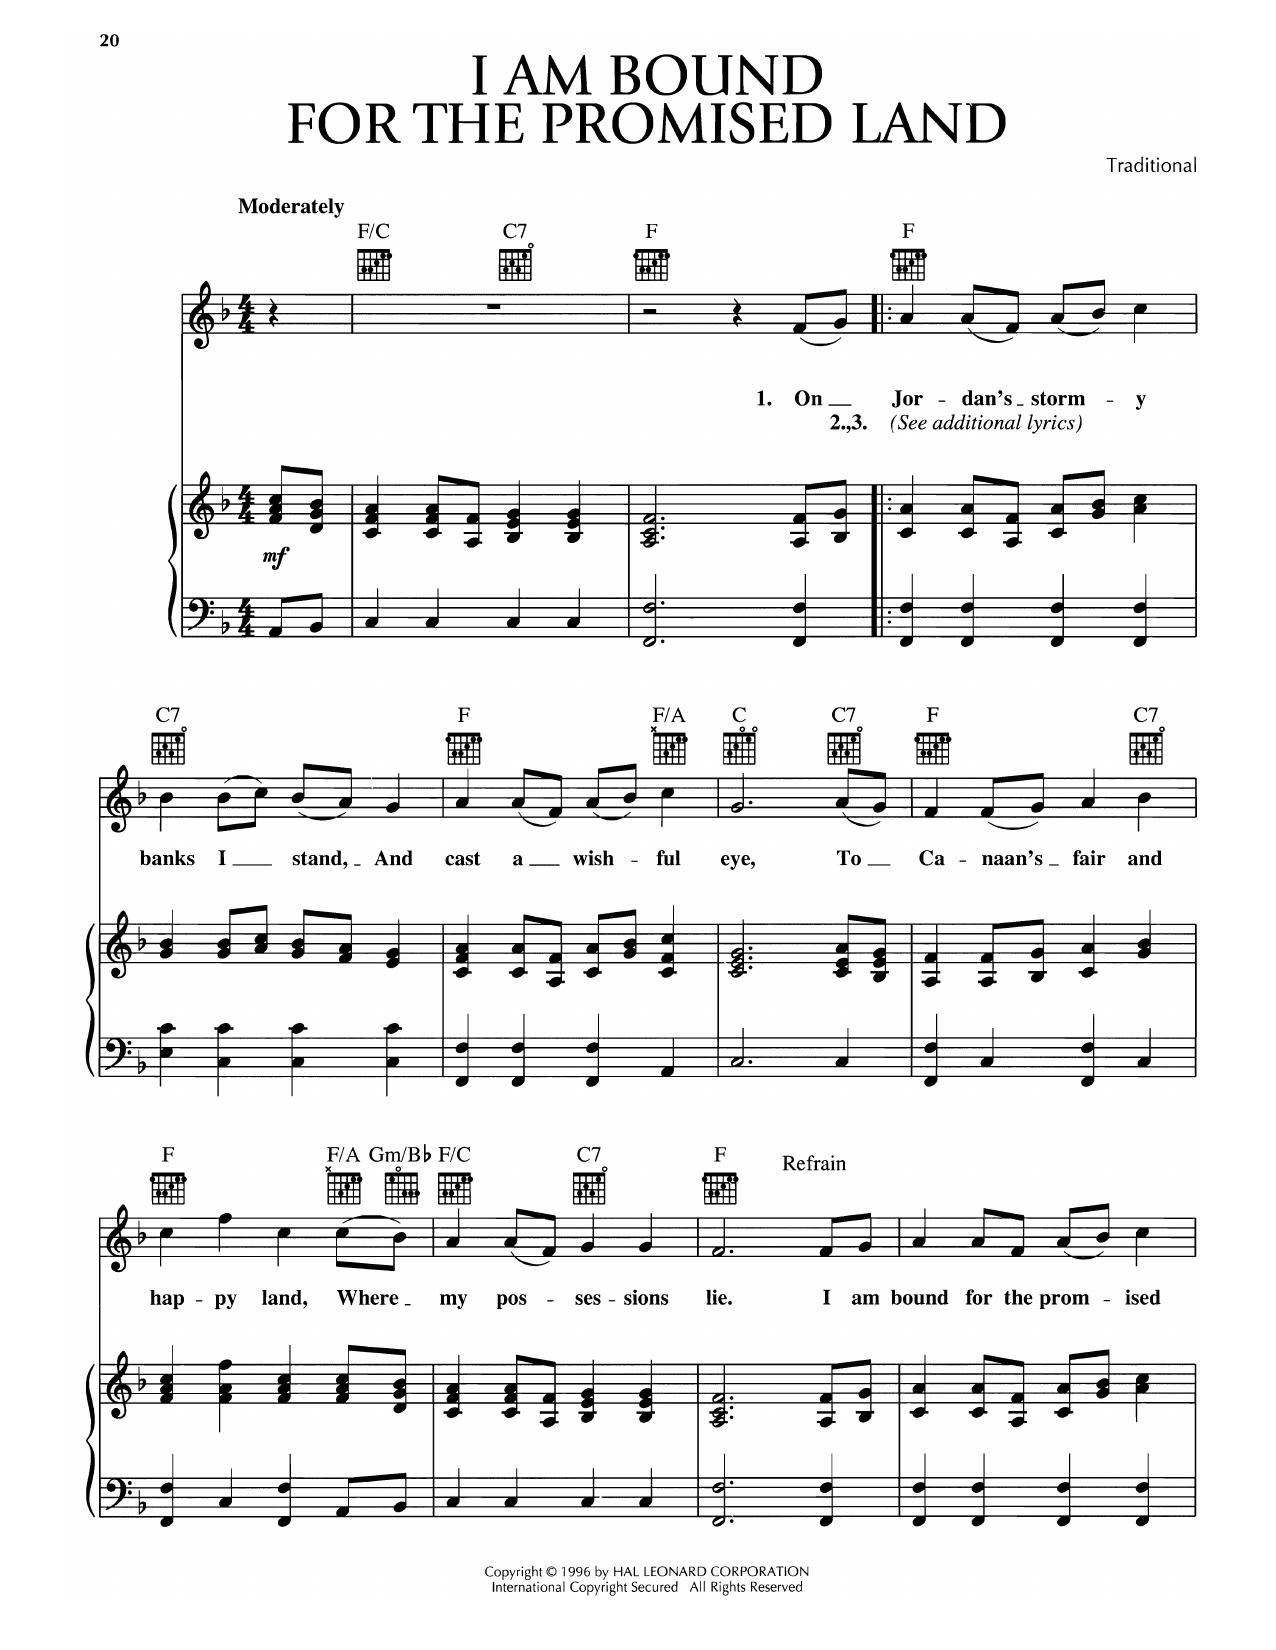 Download Traditional I Am Bound For The Promised Land Sheet Music